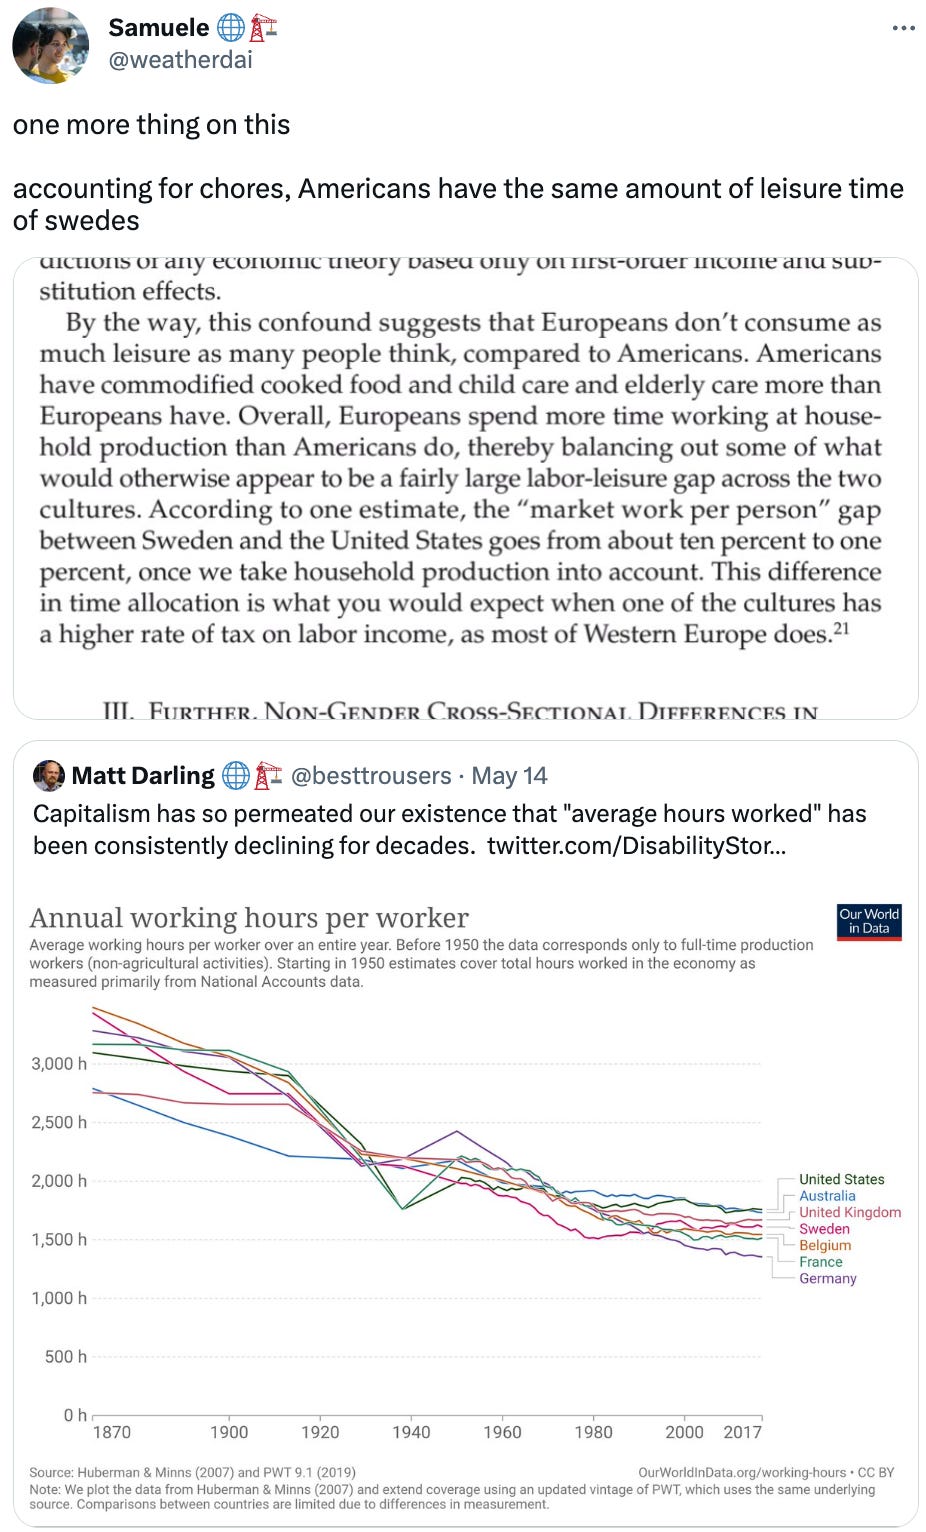  See new Tweets Conversation Samuele 🌐🏗️ @weatherdai one more thing on this  accounting for chores, Americans have the same amount of leisure time of swedes Quote Tweet Matt Darling 🌐🏗️ @besttrousers · May 14 Capitalism has so permeated our existence that "average hours worked" has been consistently declining for decades.  twitter.com/DisabilityStor…